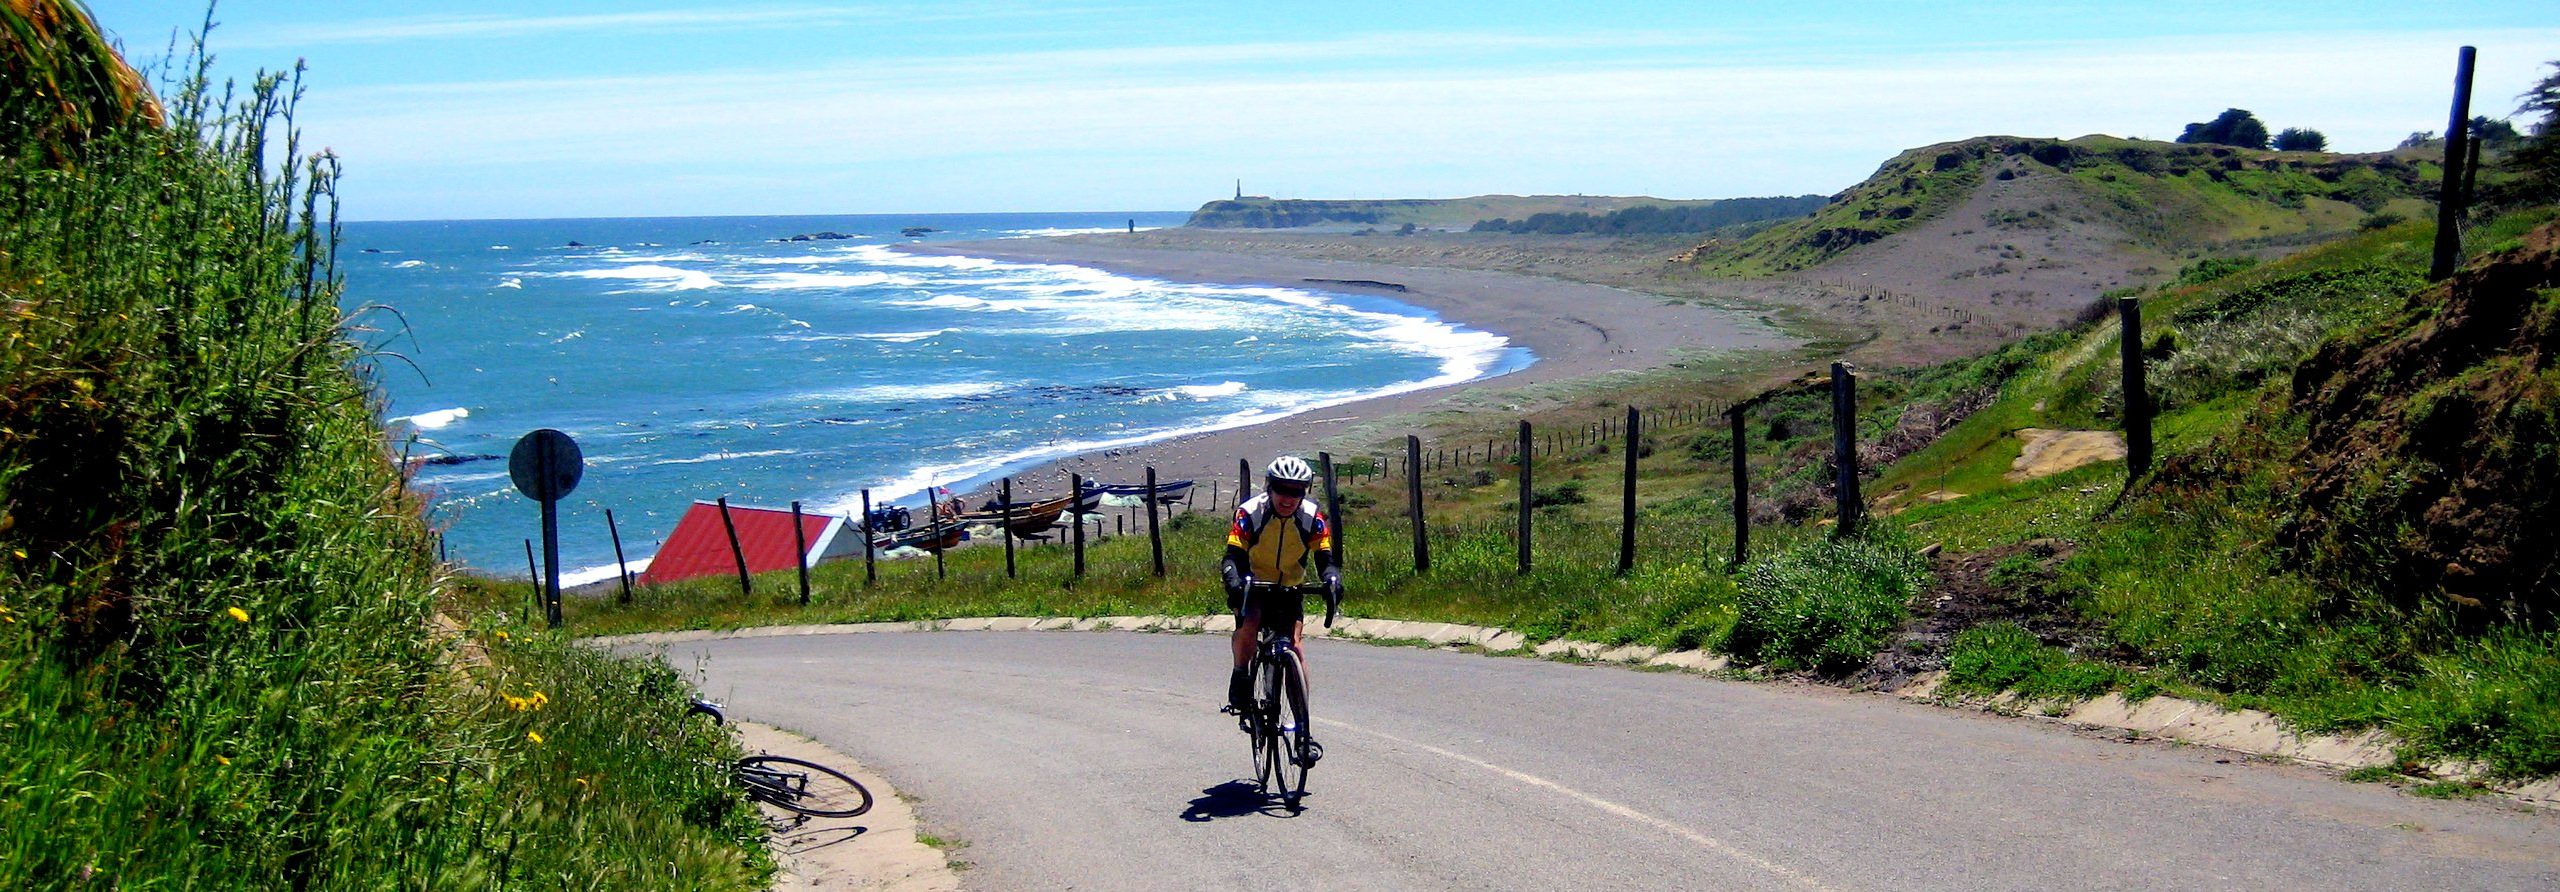 Cycling in Chile - guided bike tours in Chile on the Coast